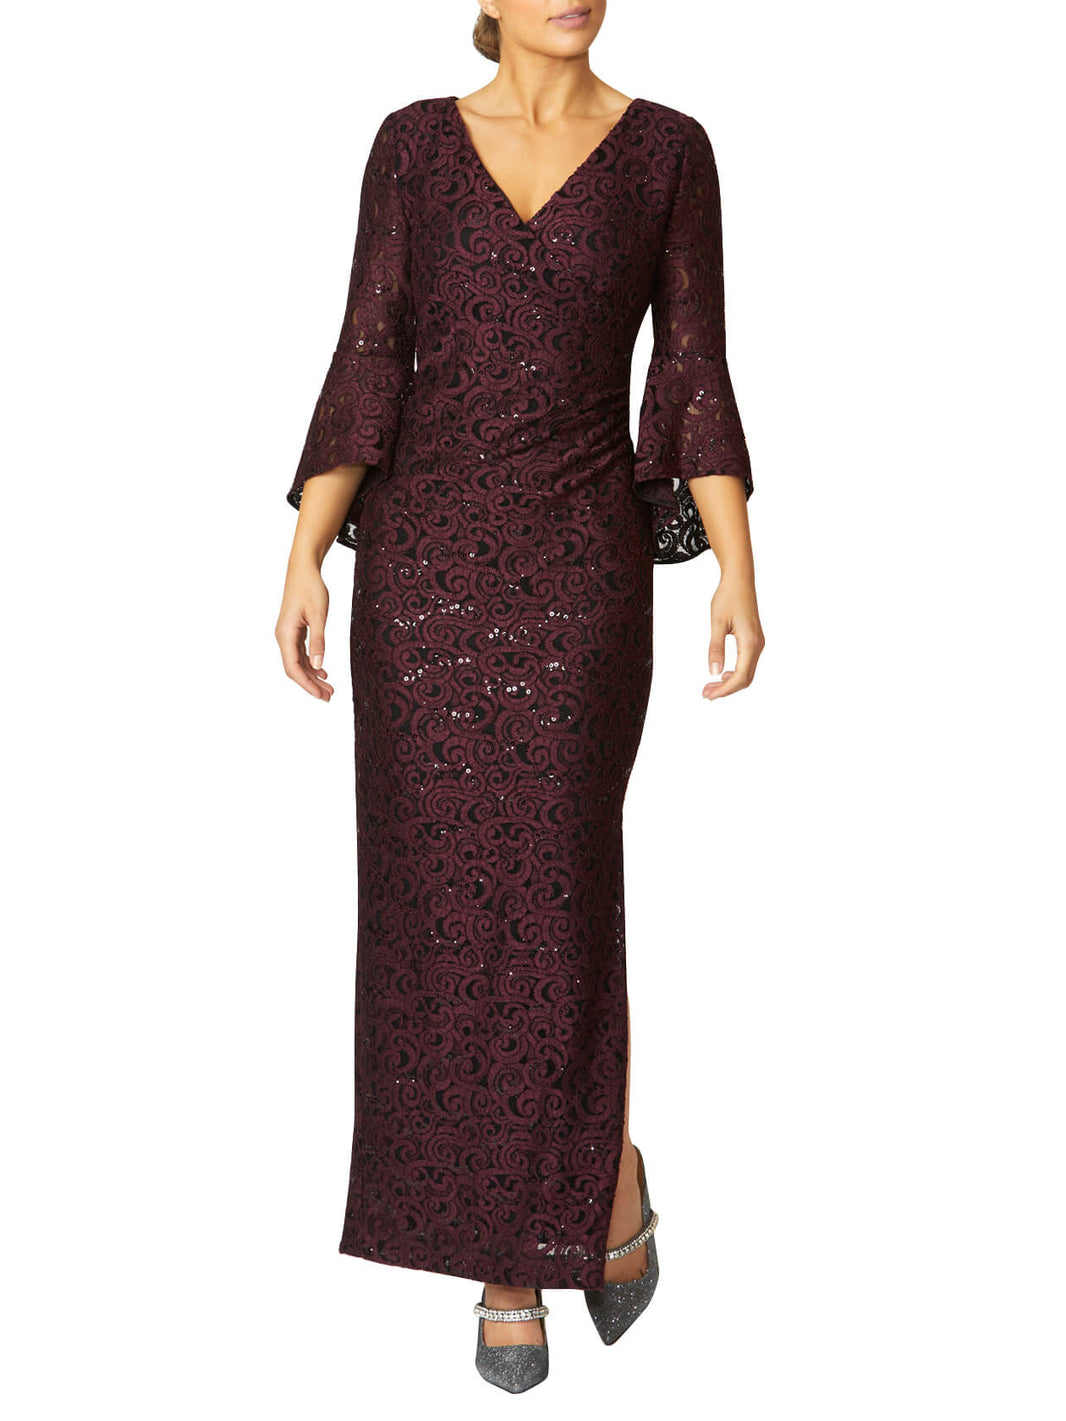 Event Dresses | Special Occasion | Party Dresses